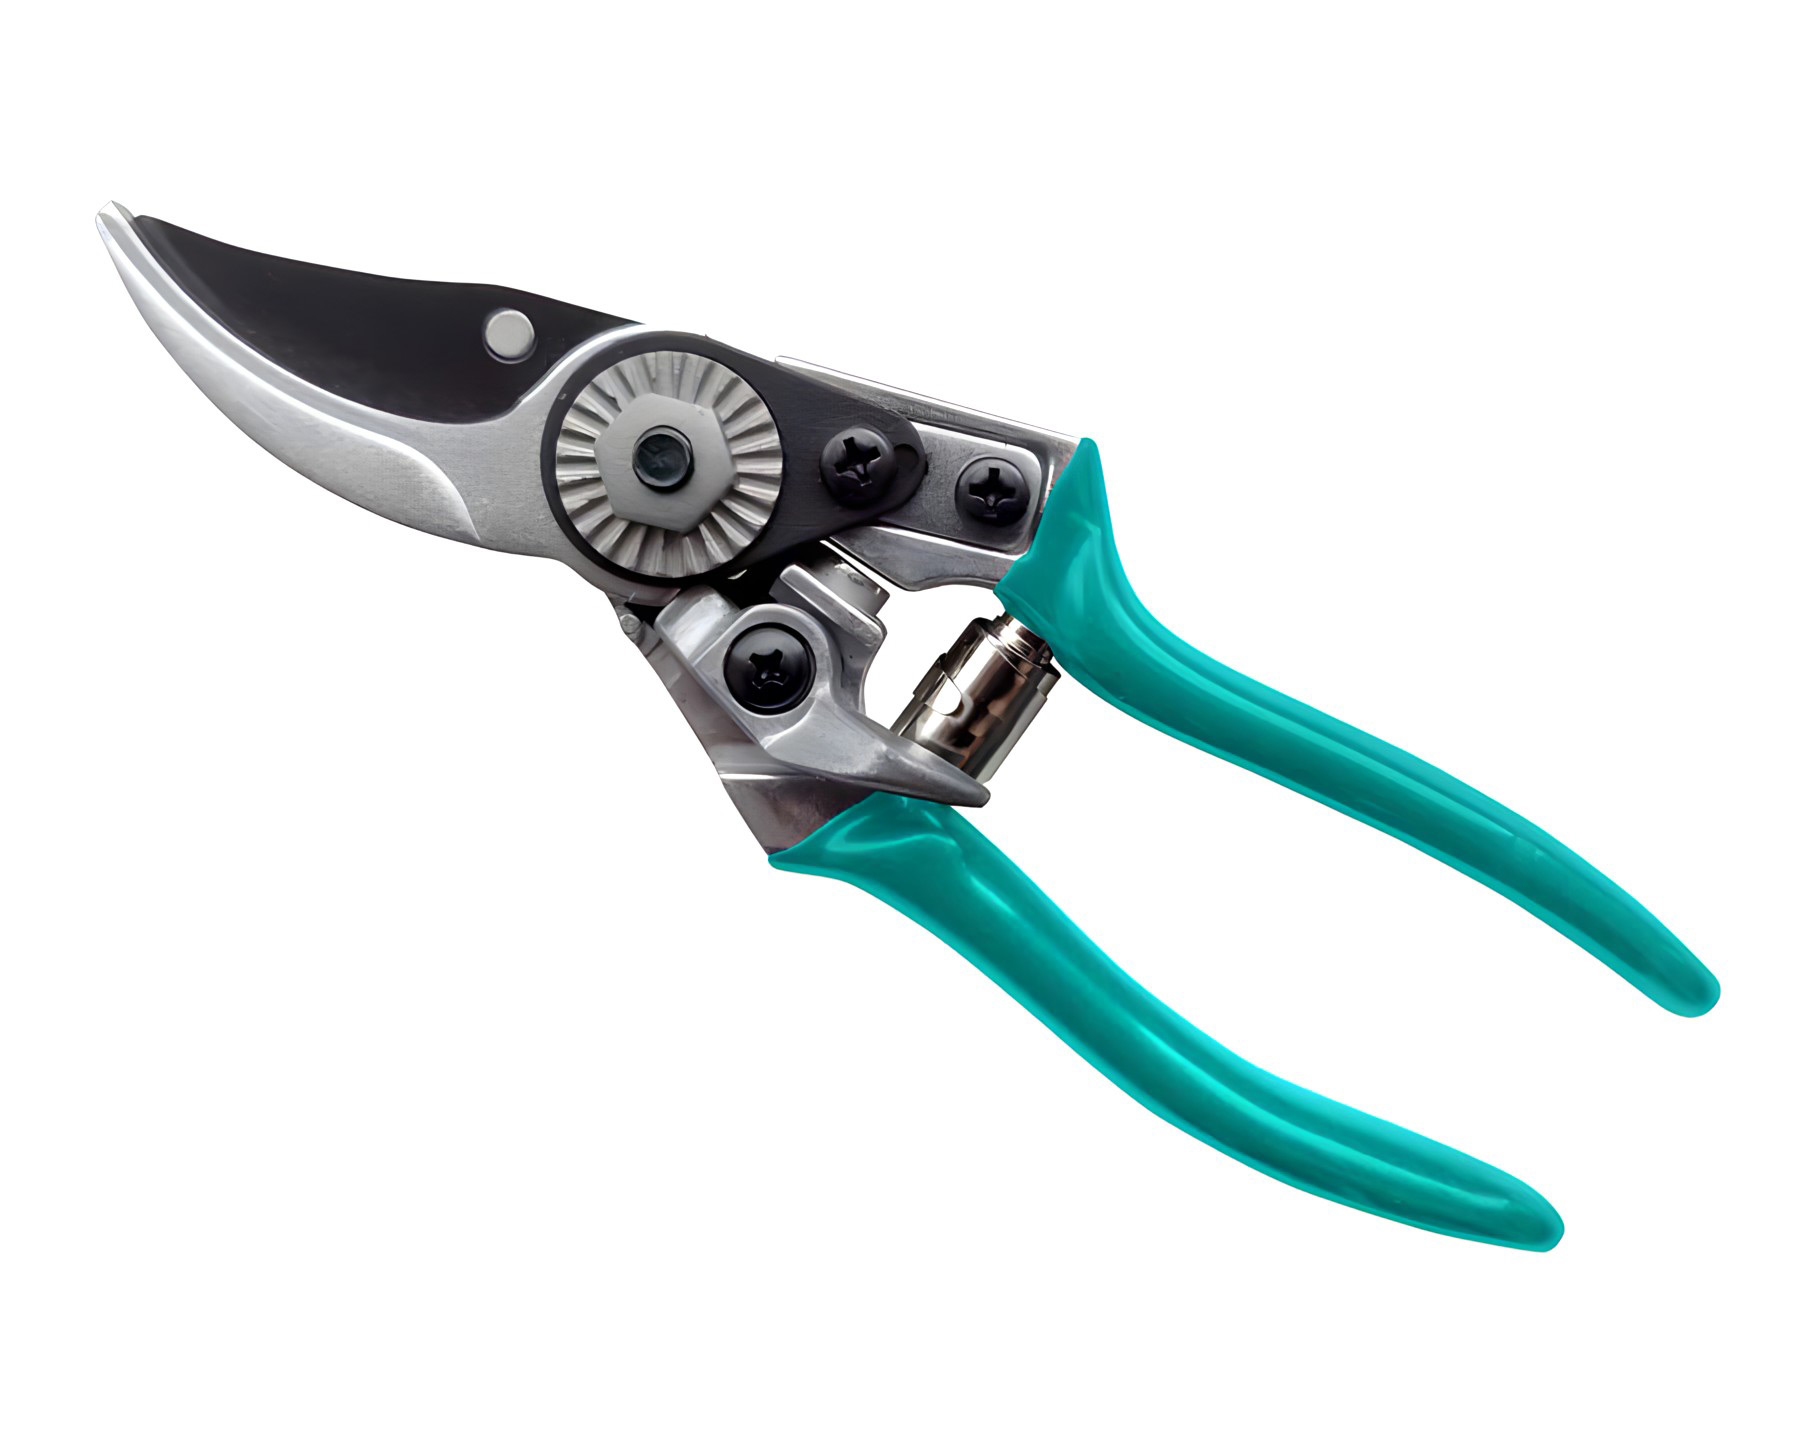 RHS endorsed Flora and Fauna Secateurs part of the Trowel and Secateur Gift Set